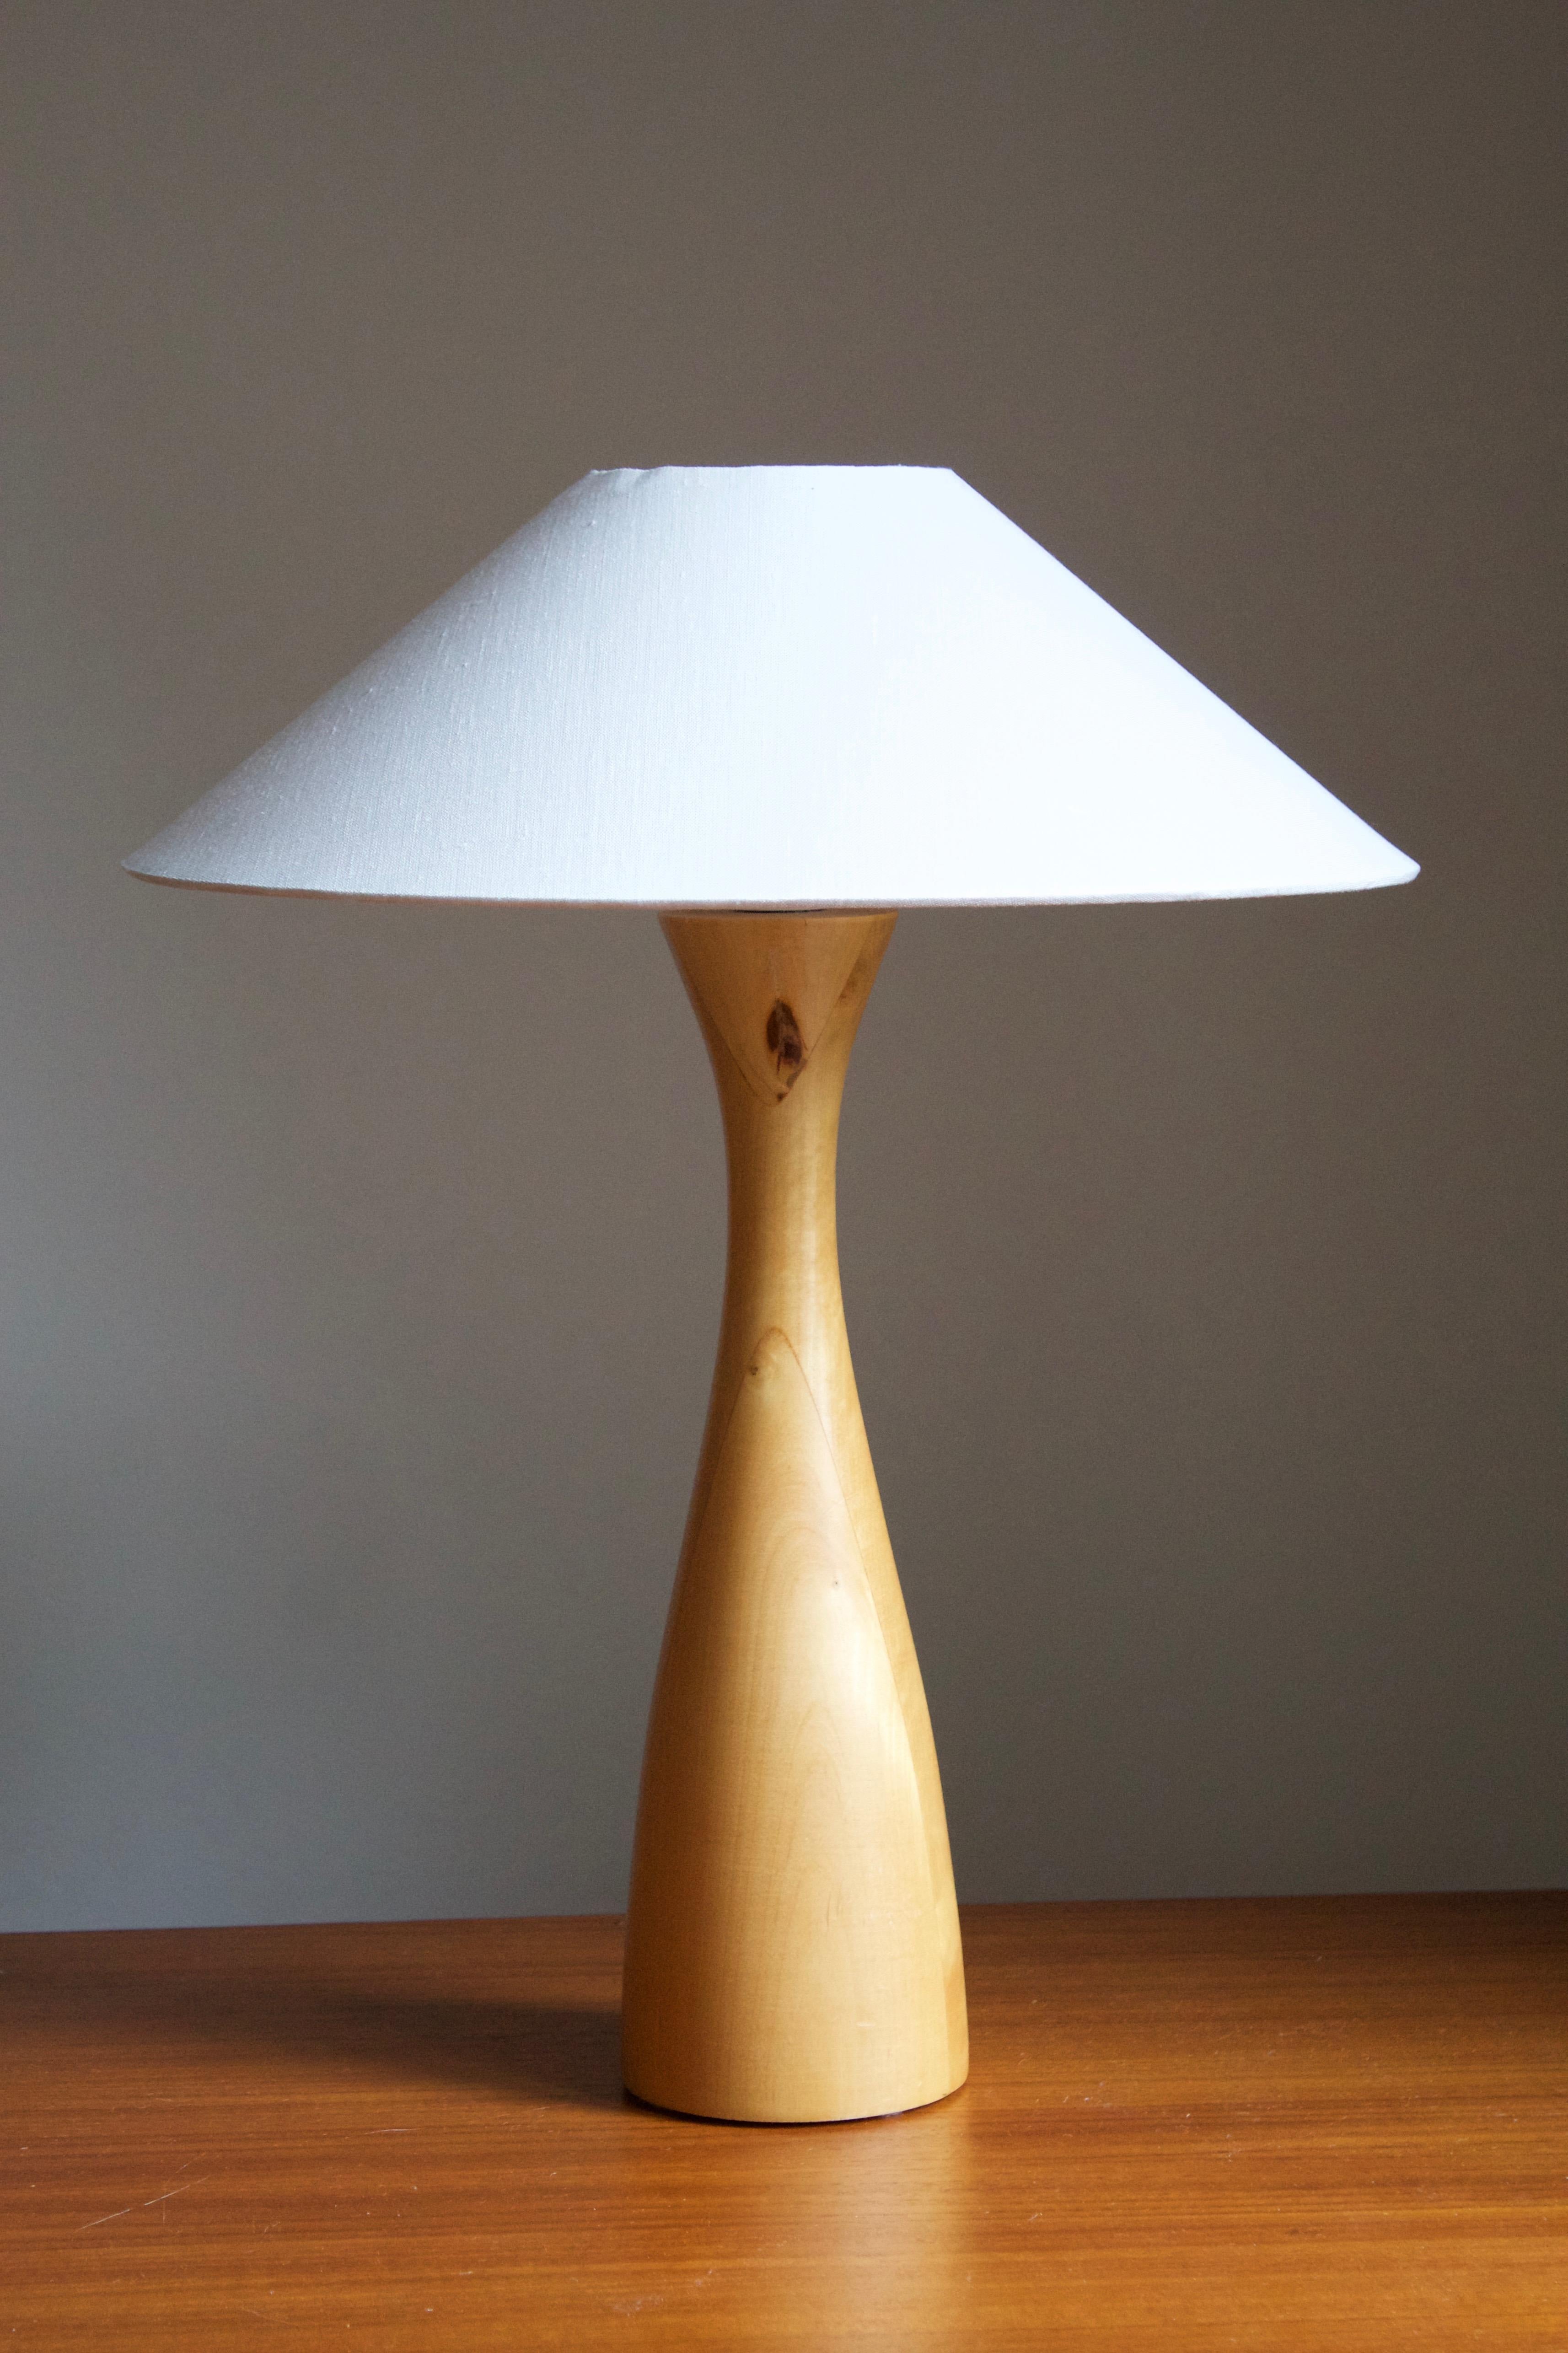 A minimalist table lamp. Designed and produced in Sweden, 1970s. Features turned solid wood.

Stated dimensions exclude lampshade. Height includes socket. Sold without lampshade.